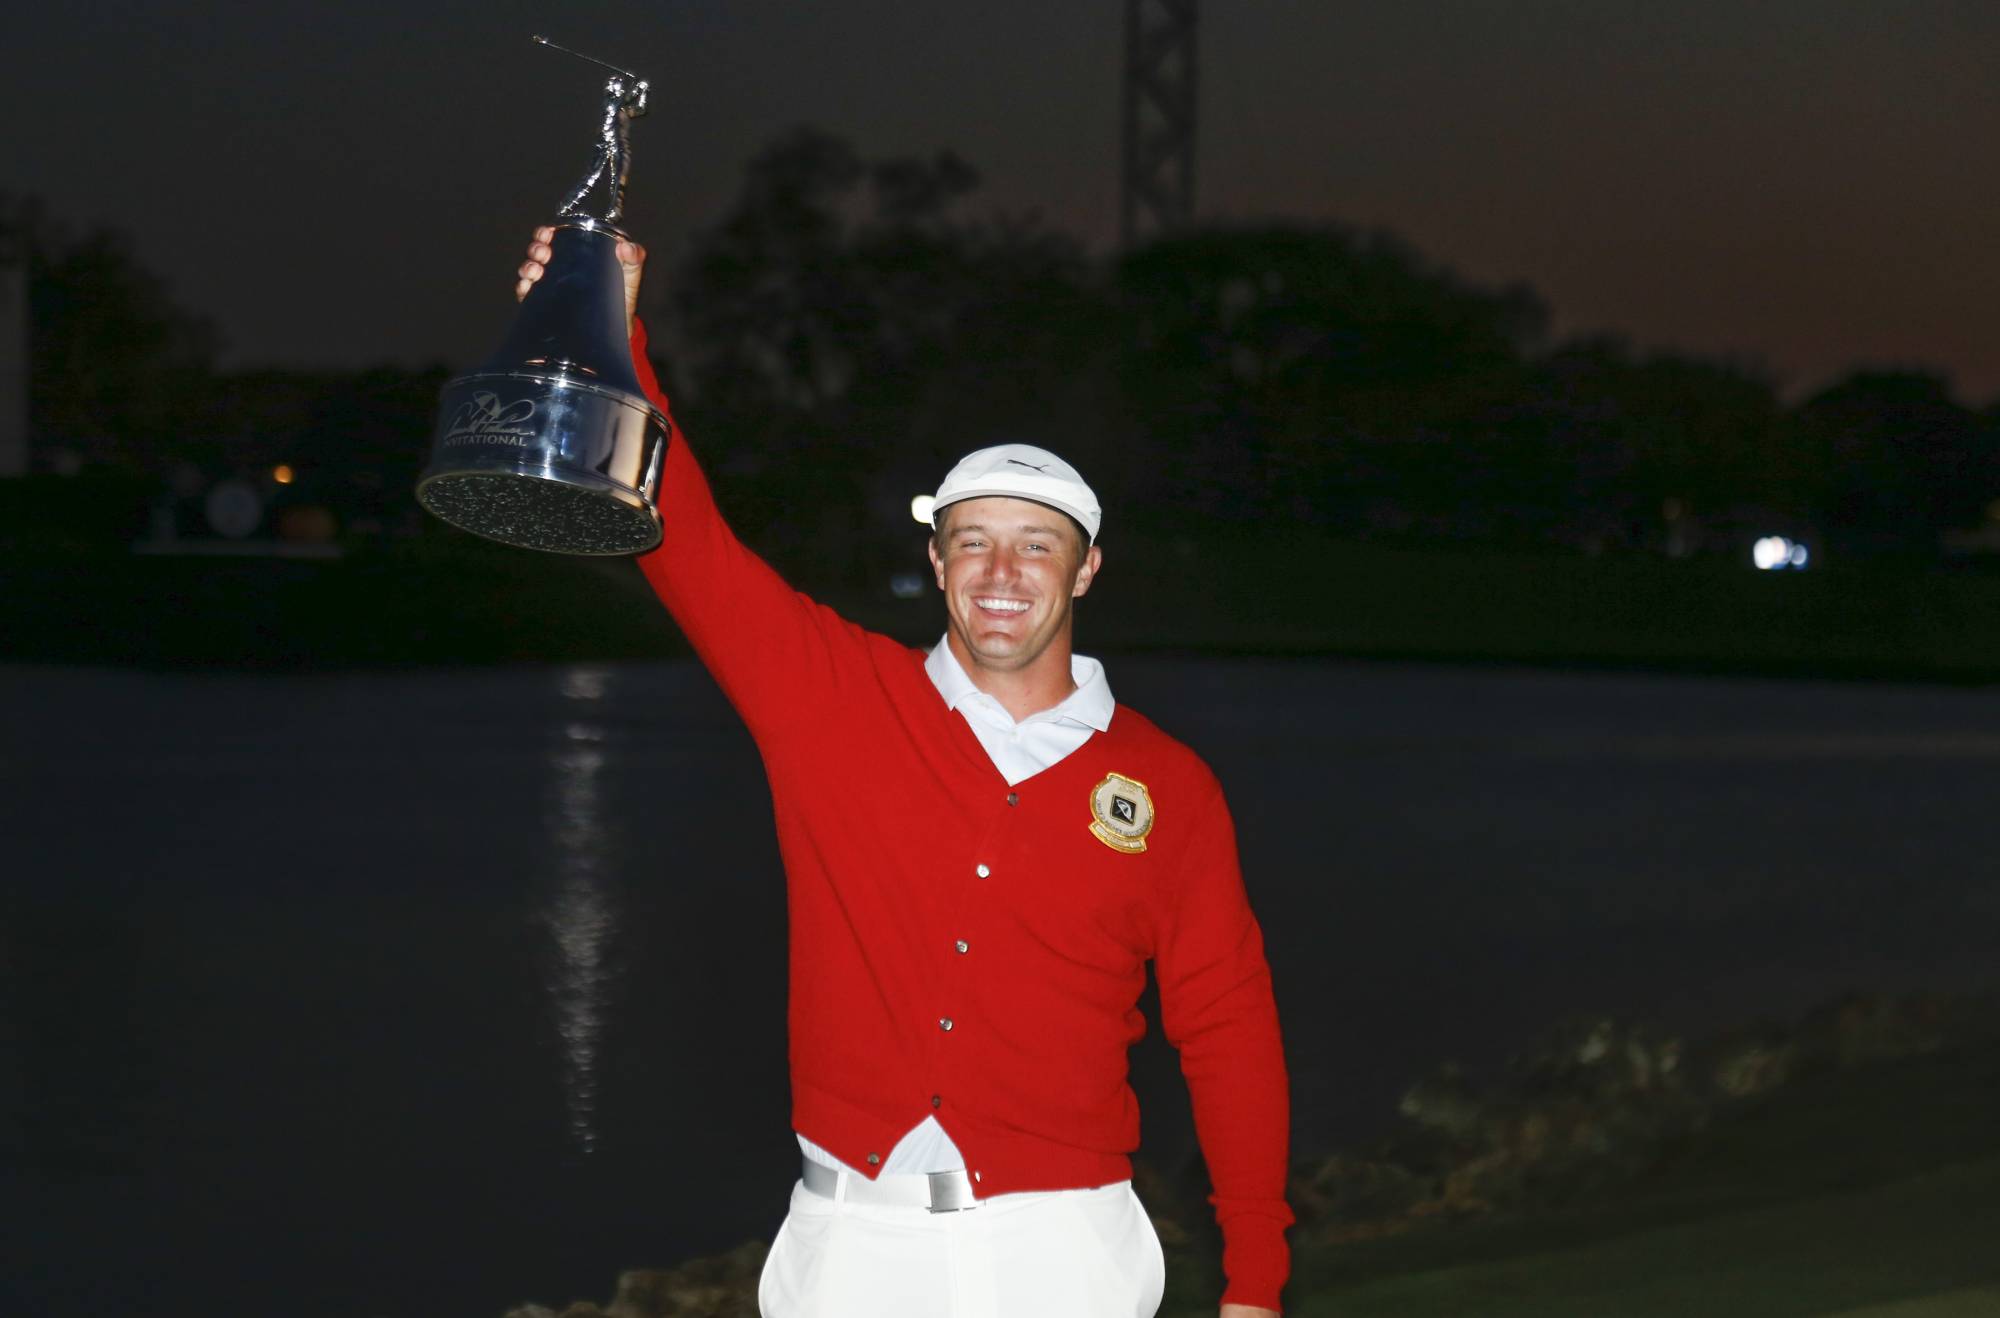 Bryson DeChambeau powers to victory at Bay Hill